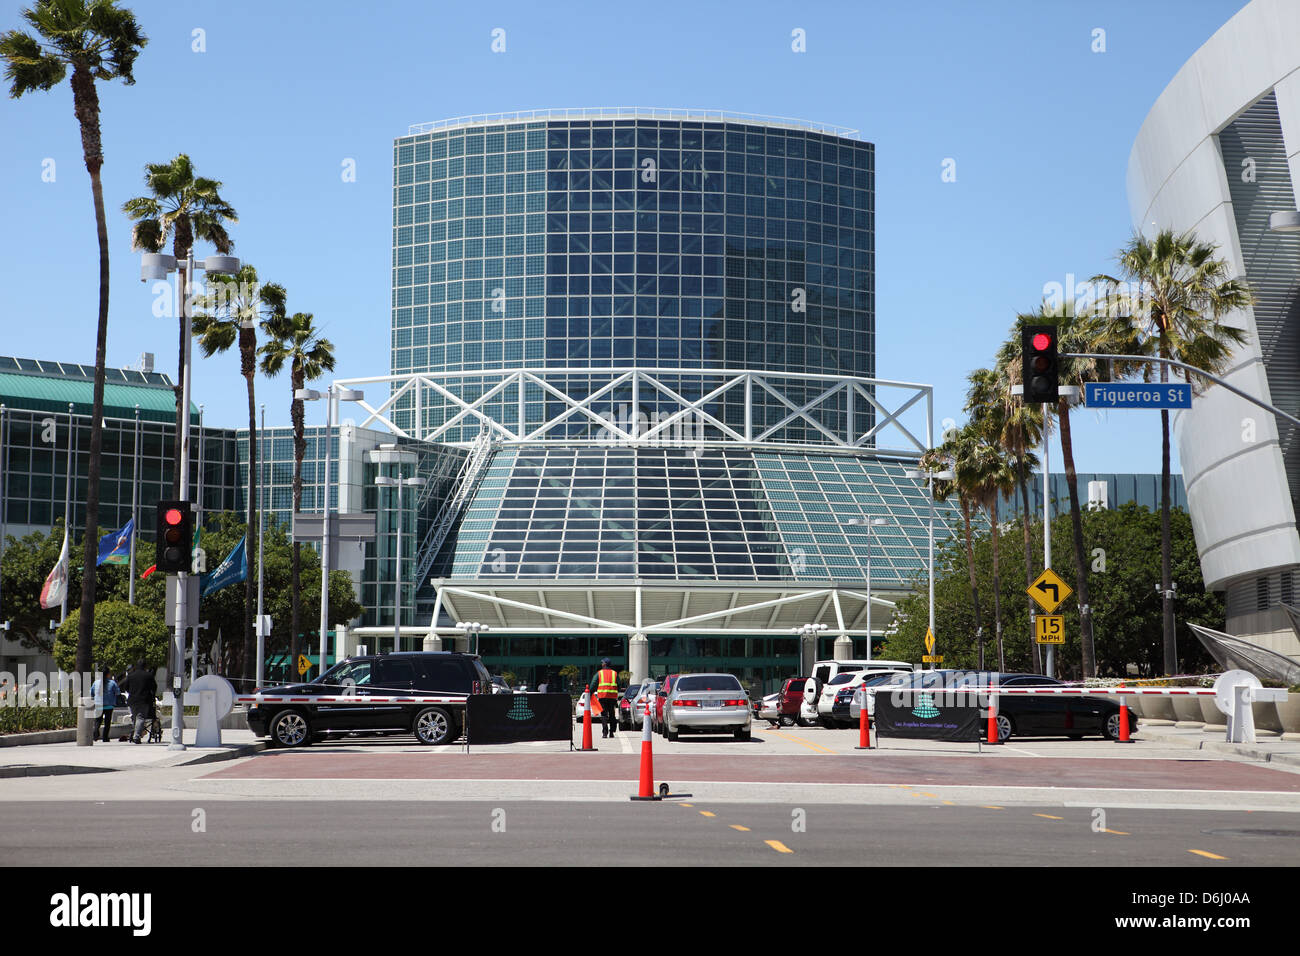 LOS ANGELES, CALIFORNIA, USA - April 16, 2013 - The Convention Center in Downtown Los Angeles on April 16, 2013. Stock Photo